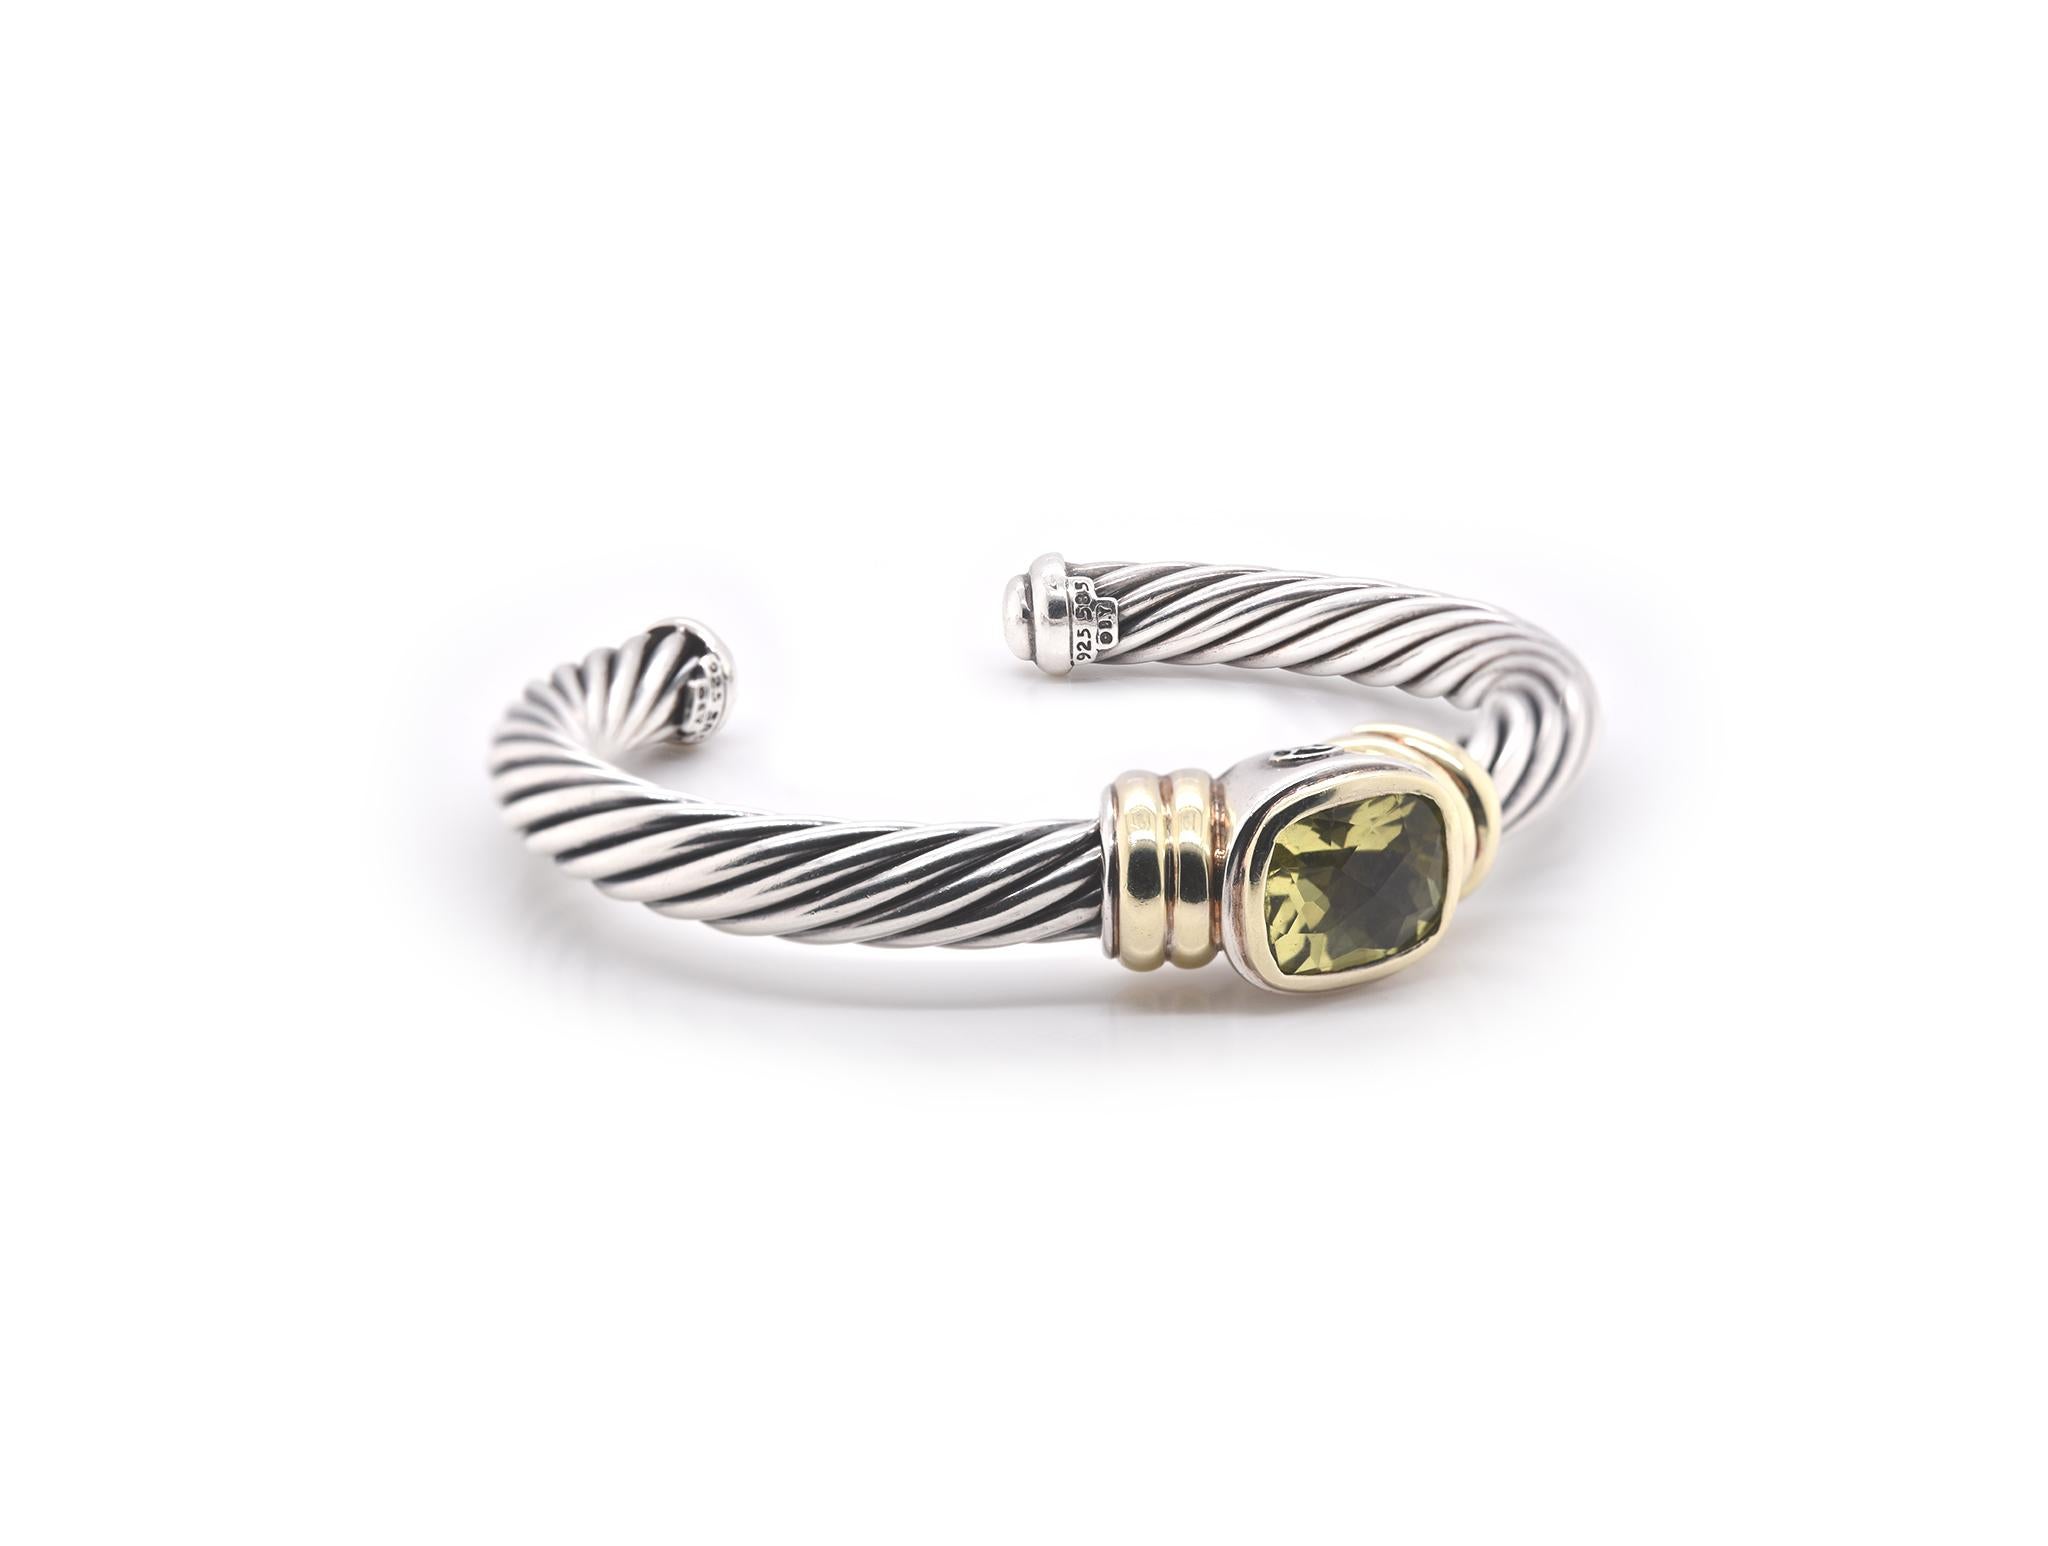 Designer: David Yurman
Material: 14k yellow gold and Sterling silver
Gemstone: Peridot
Dimensions: bracelet measures 7.25mm in width
Size: 6.5-inch wrist 
Weight: 46.14 grams
